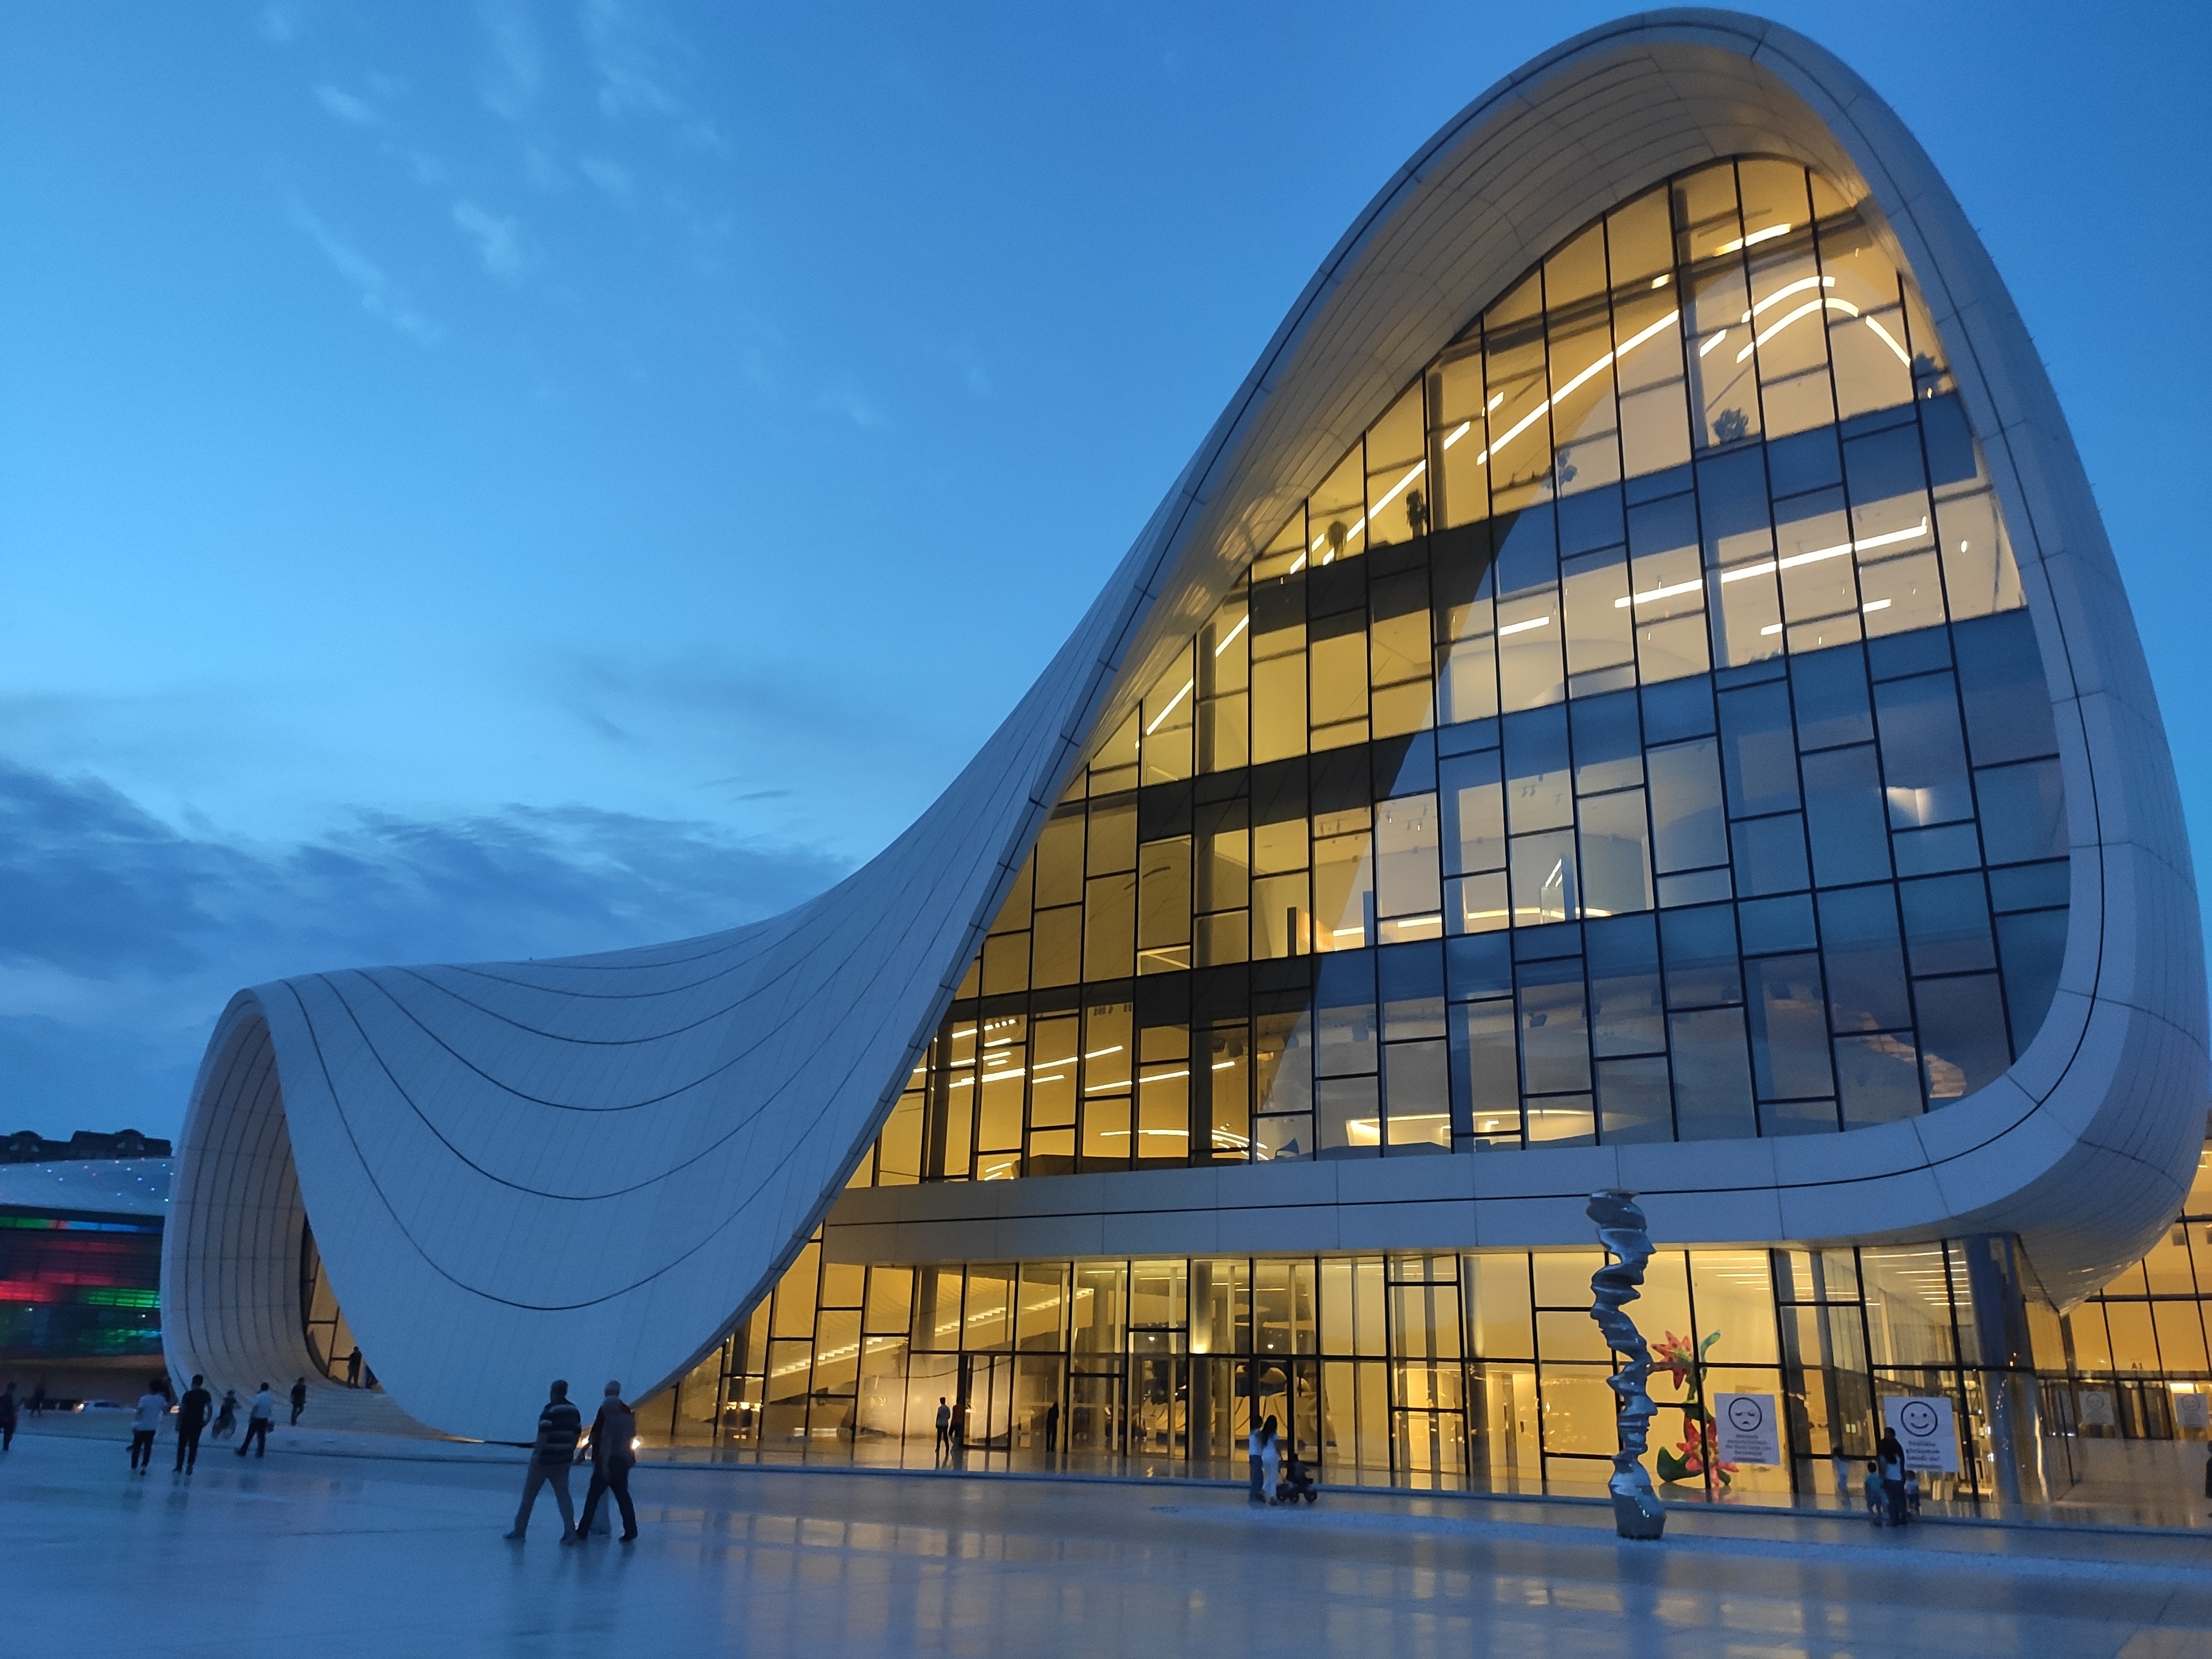 A modern white and glass building with a curved roof that appears to be melting on one side. Lights inside give a golden glow behind the glass.